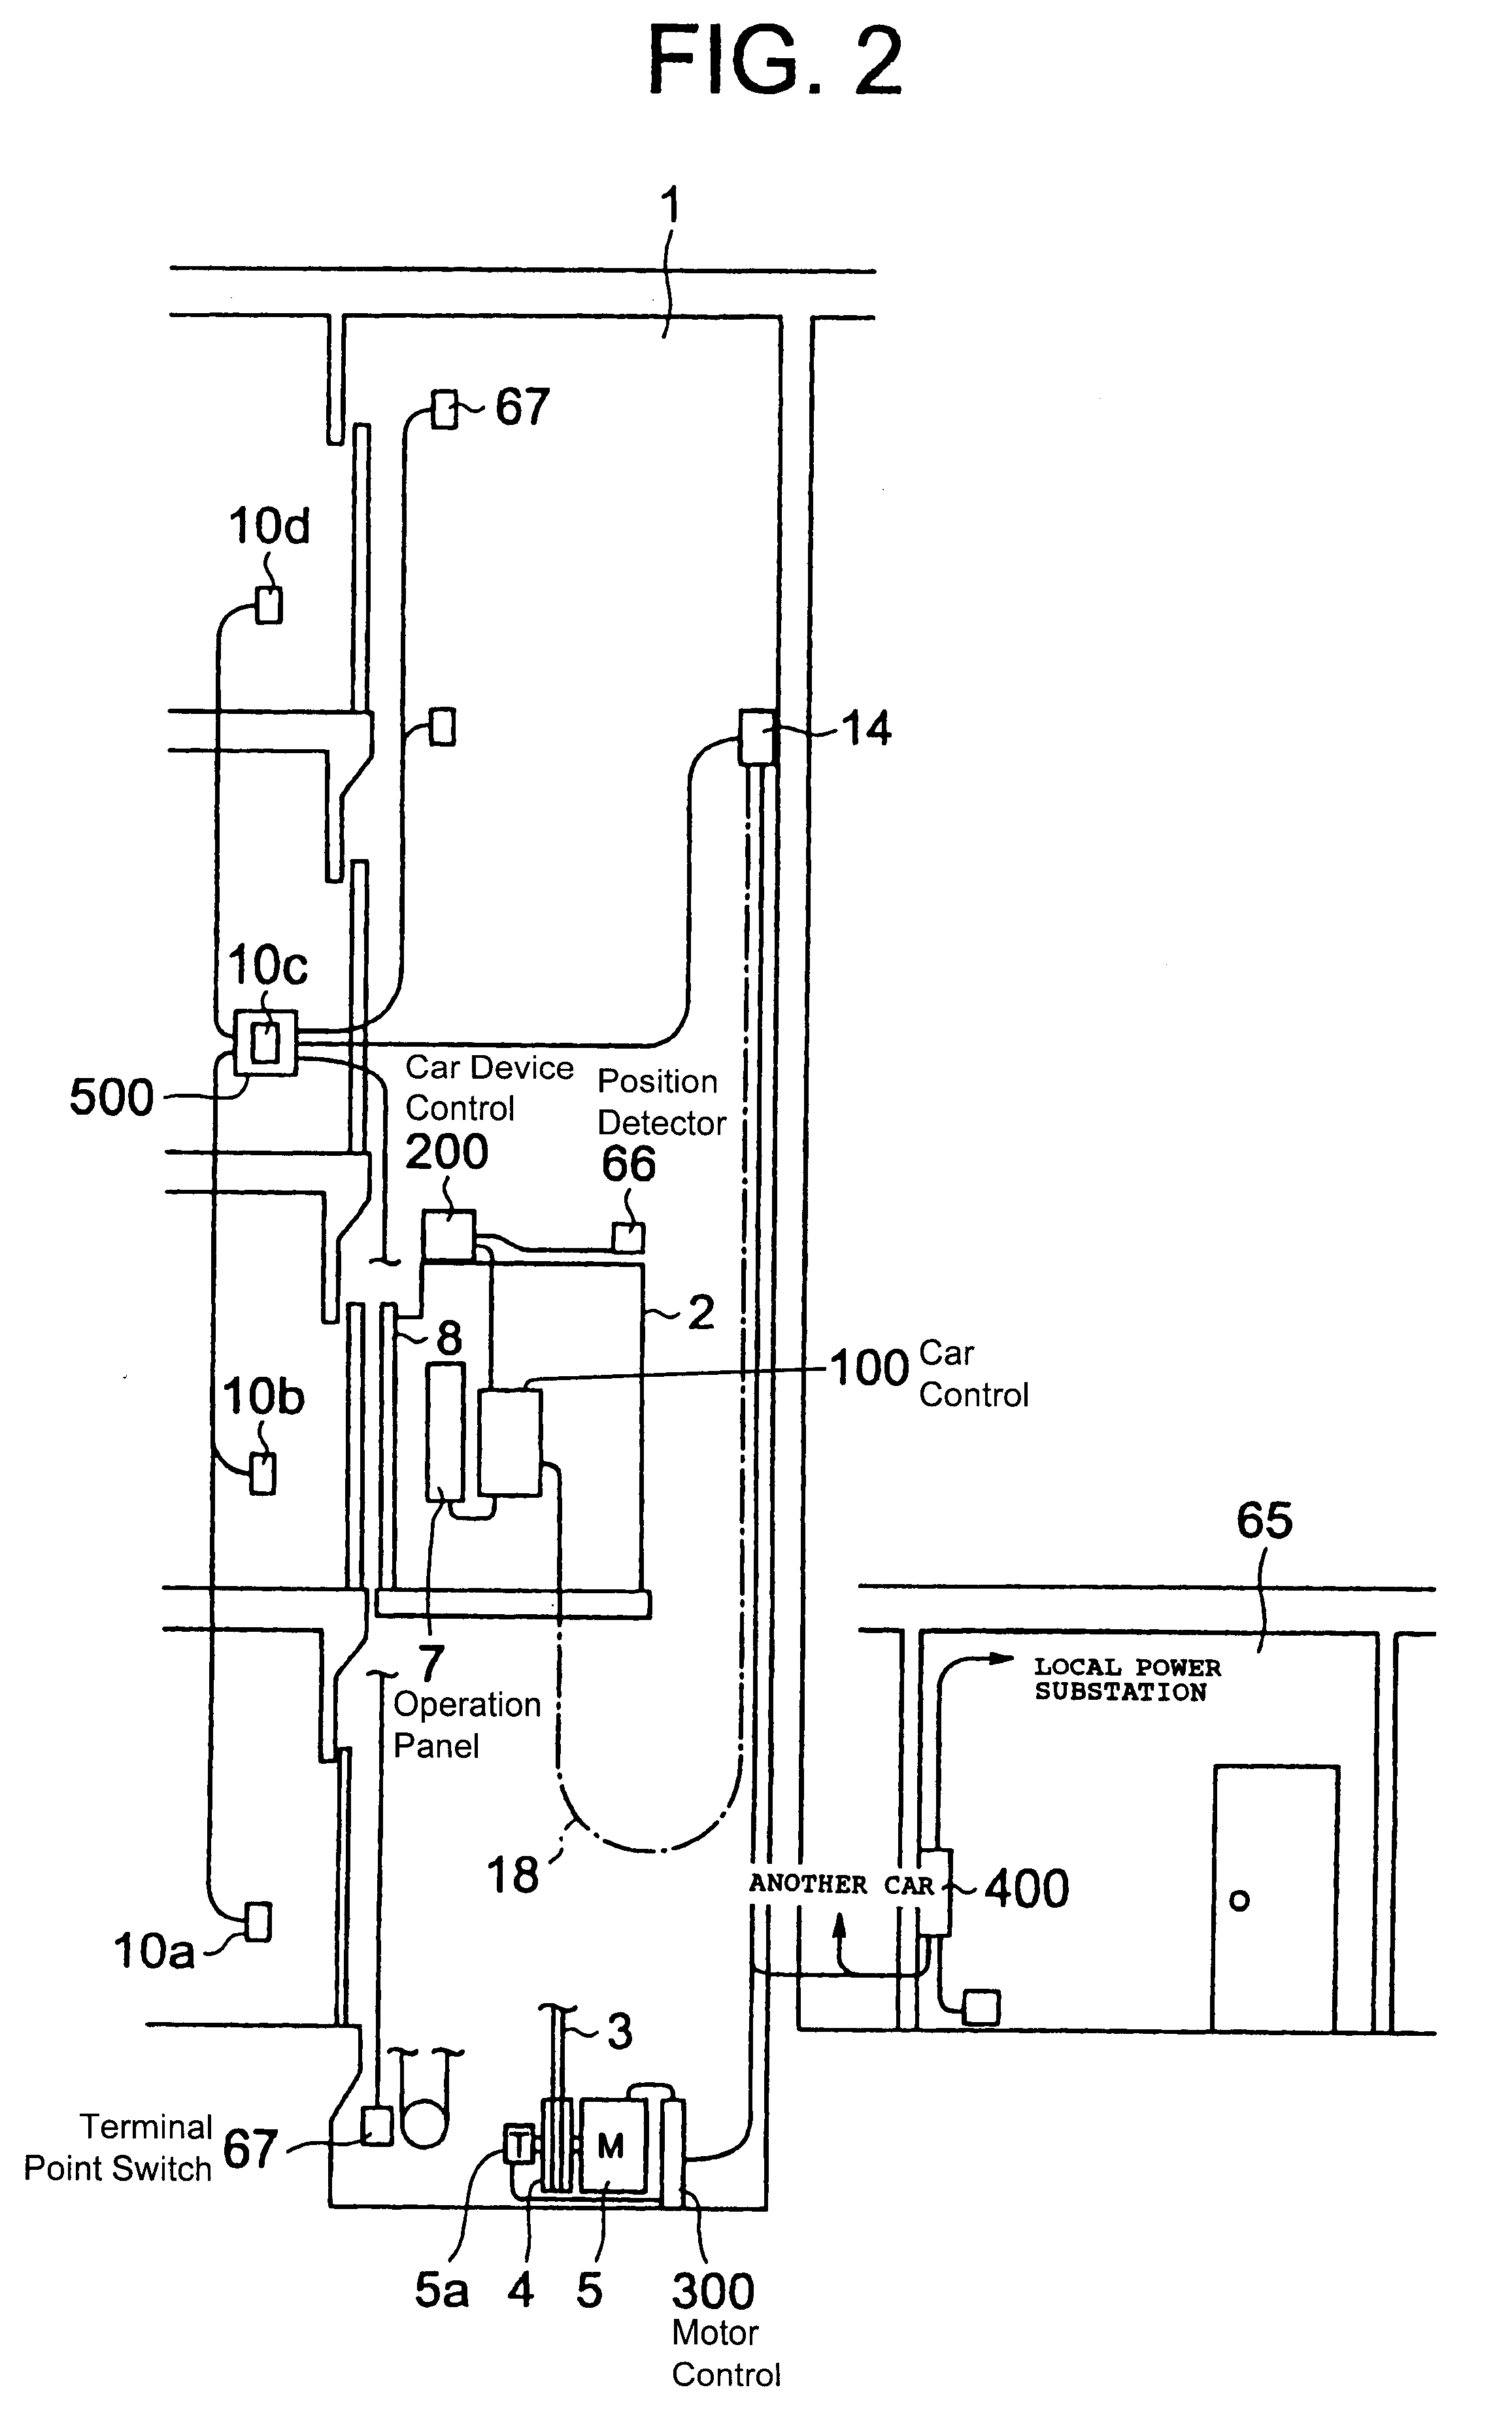 Controlling apparatus for elevator with divided control panel